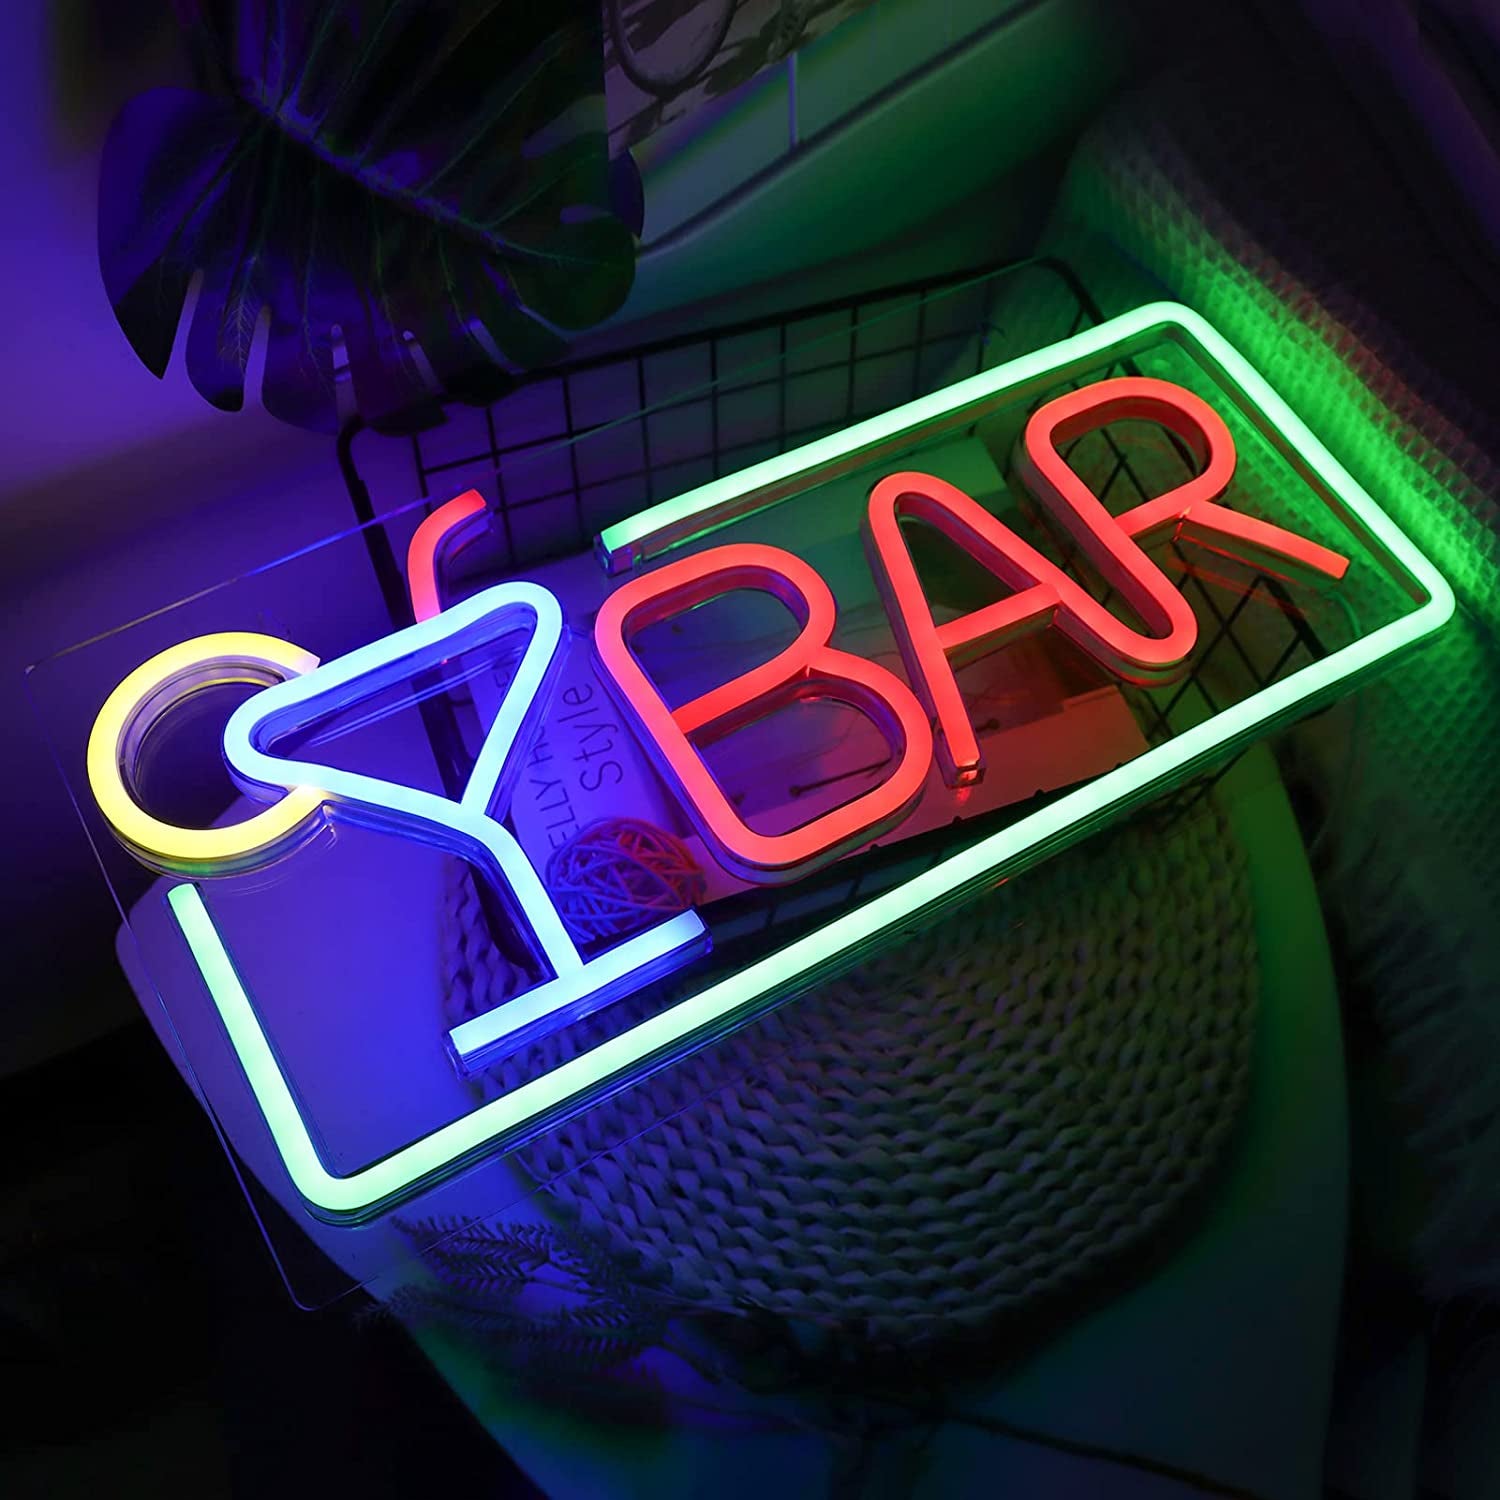 Bar Neon Signs for Wall Decor Led Bar Lights for Bedroom Led Sign Room Decor Aesthetic Suitable for Living Room Bistro Man Cave Party Christmas & Halloween Led Art Wall Decorative Lights Unique Gift for Lover, 5V Usb Power